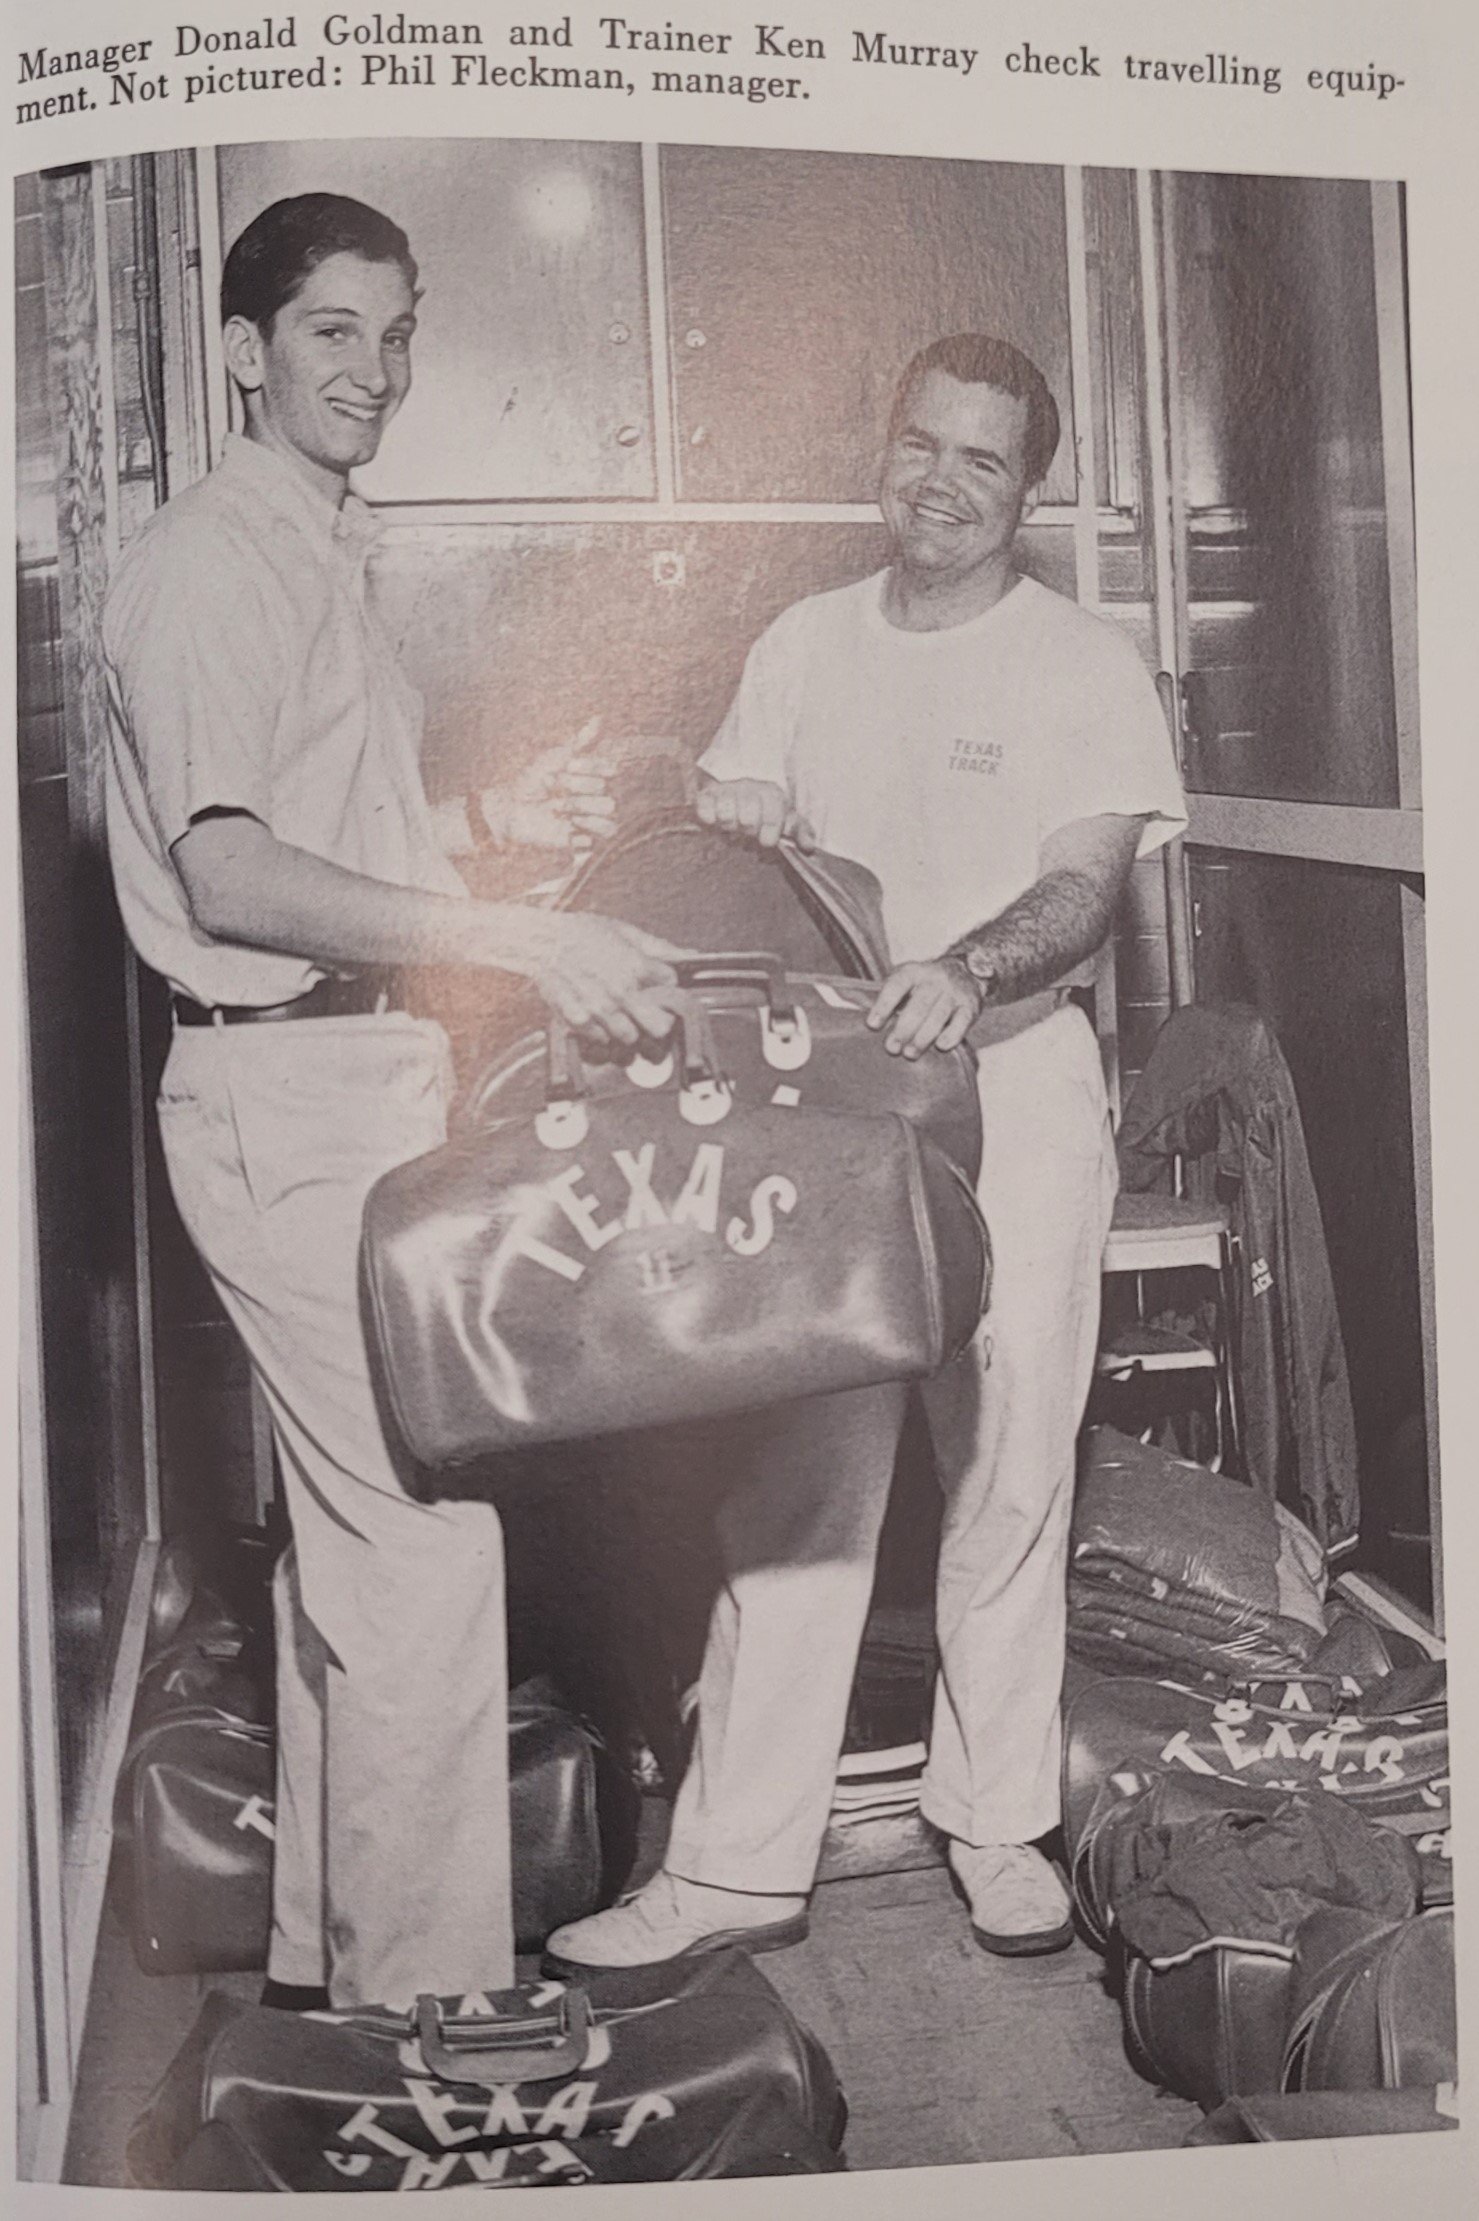 Track - manager Donald Goldman and trainer Ken Murray 